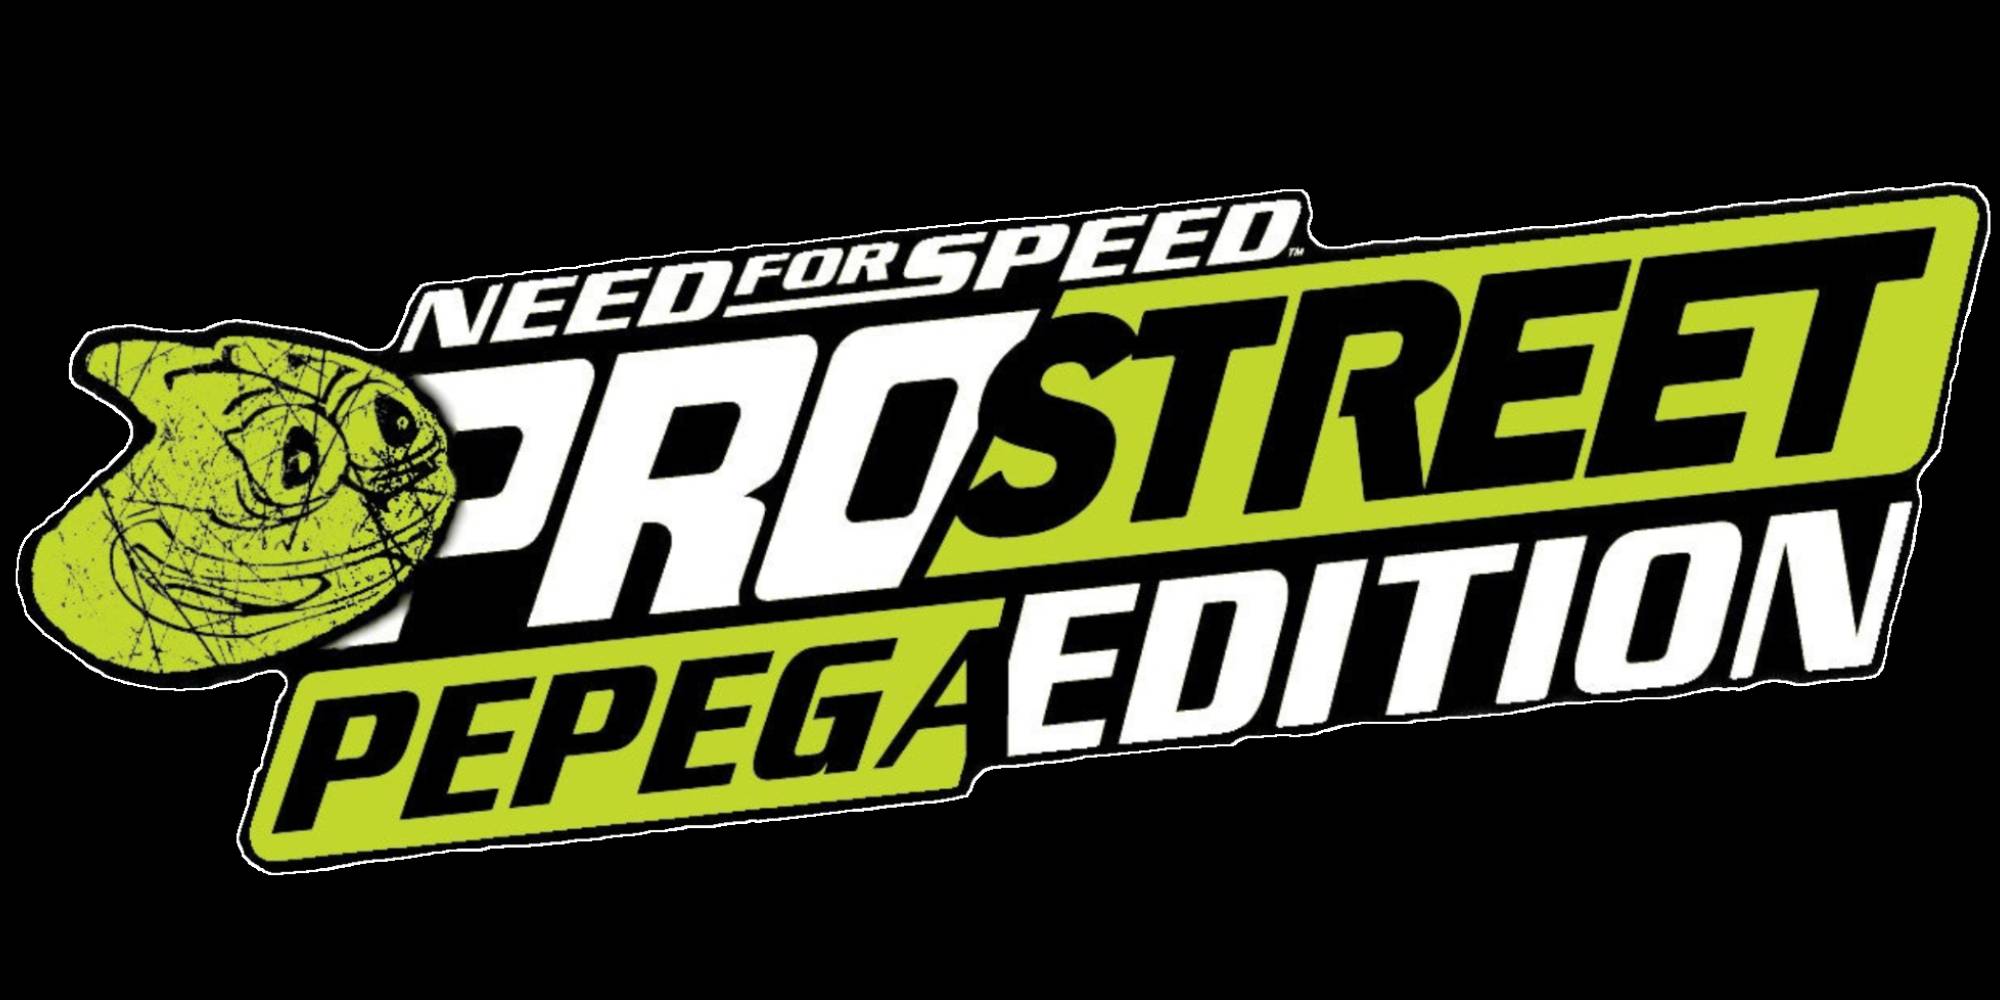 Need For Speed Pro Street Pepega Edition (2023)